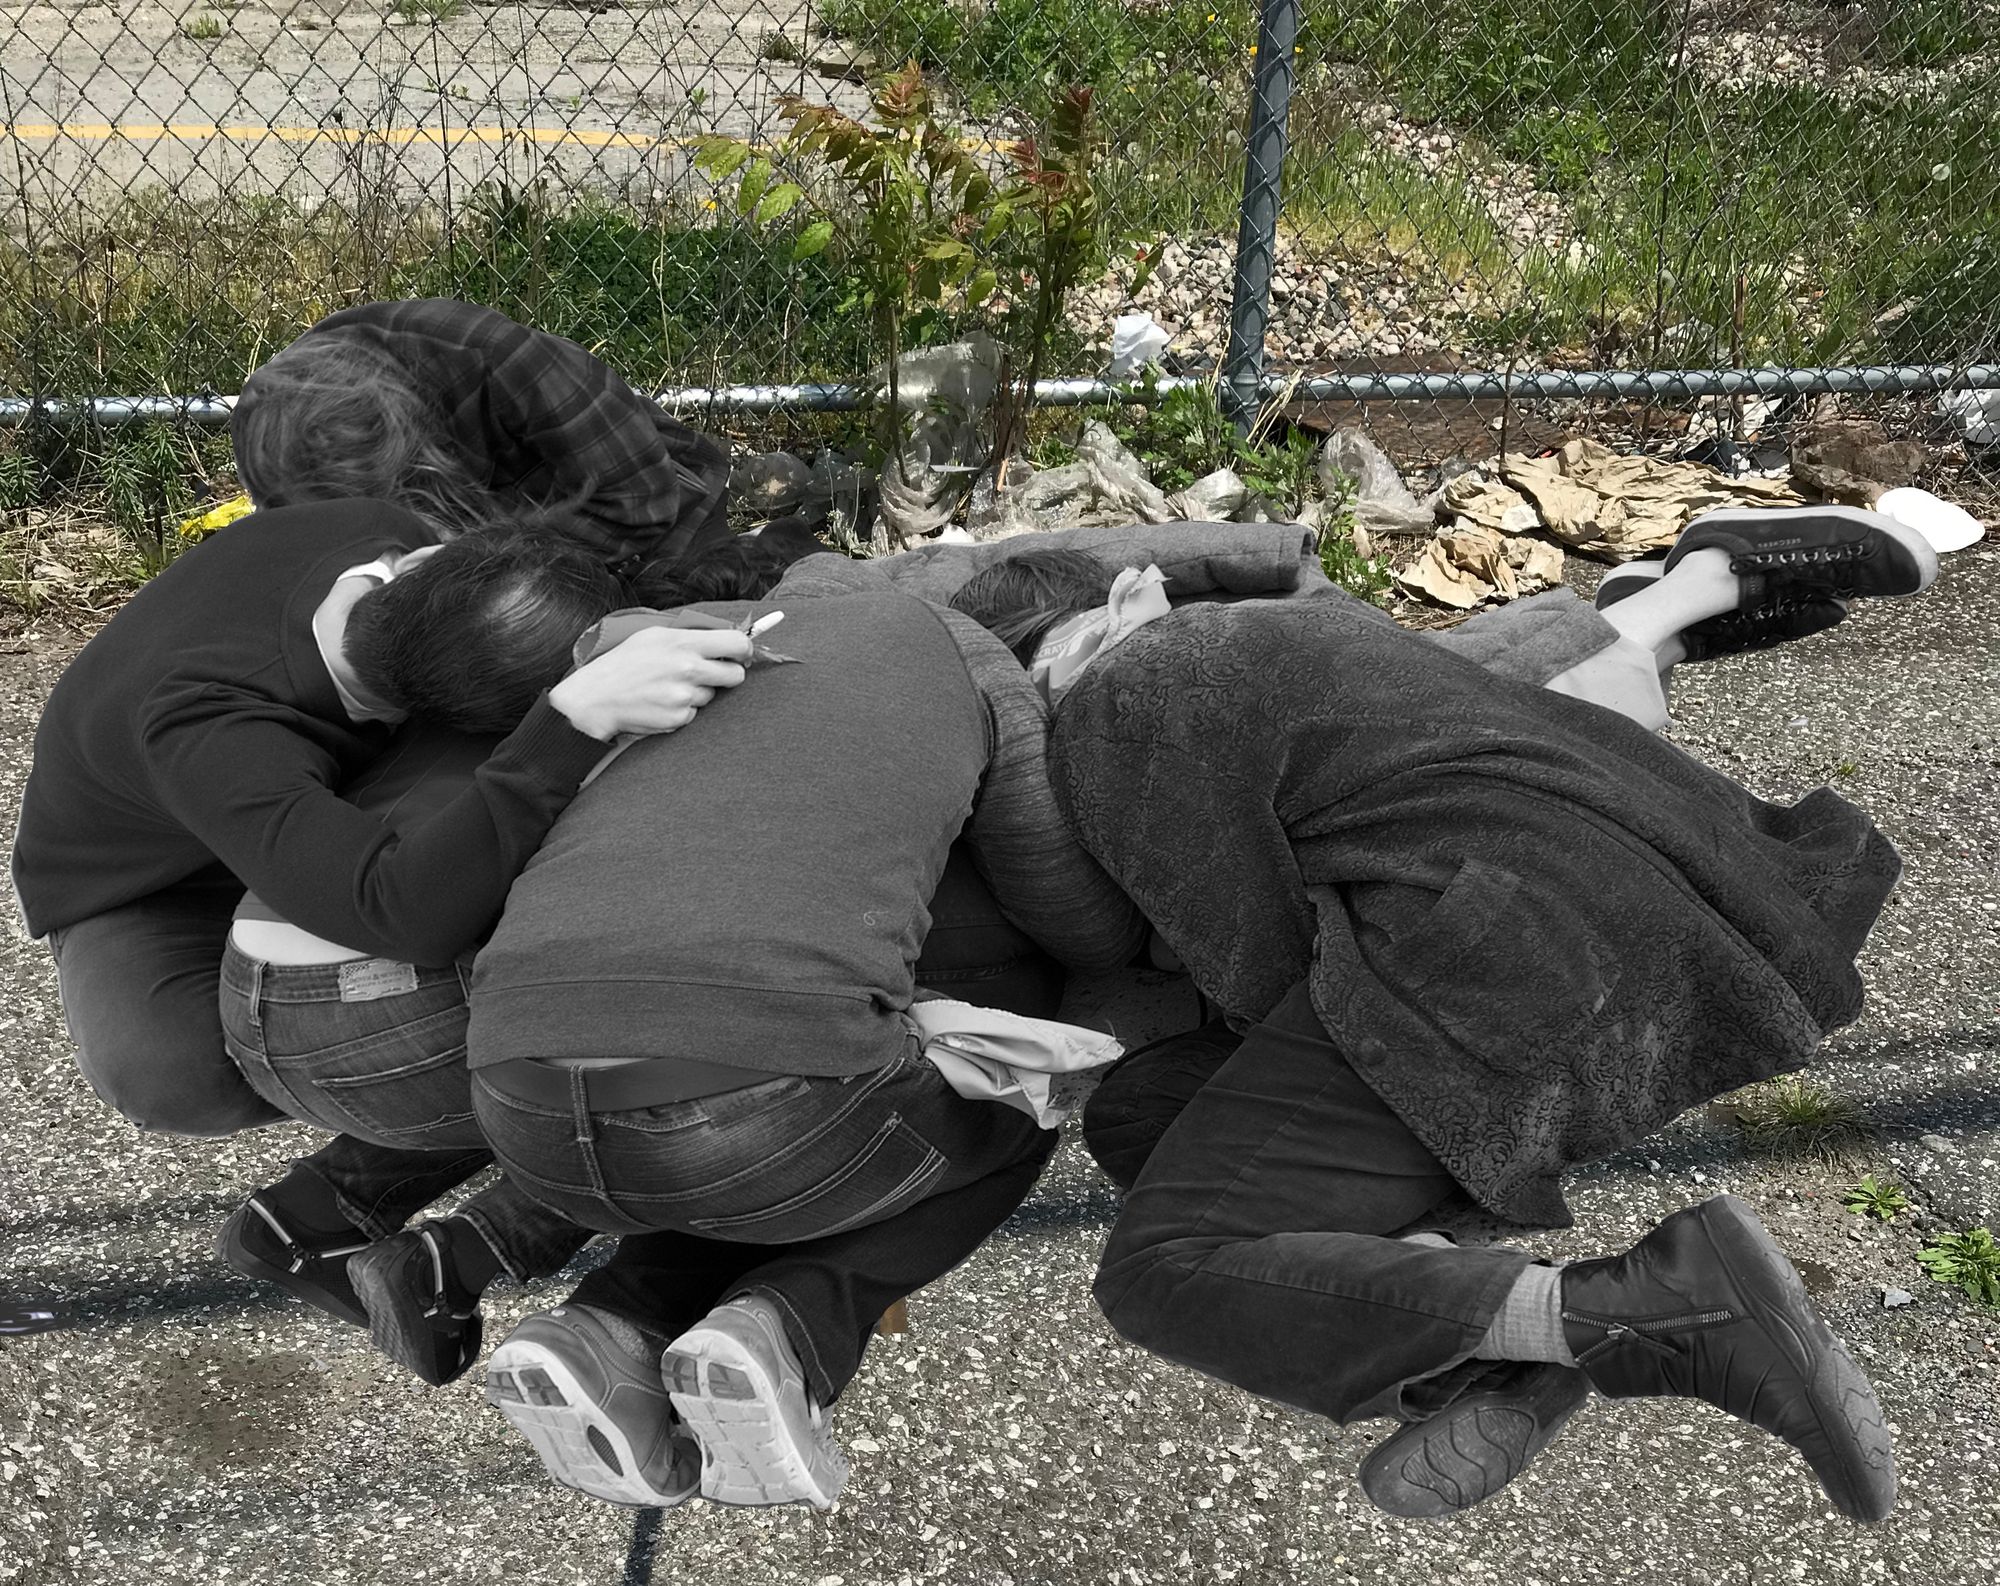 a group of bodies, some crouching and slouched over one another on asphalt with a chain link fence in the background